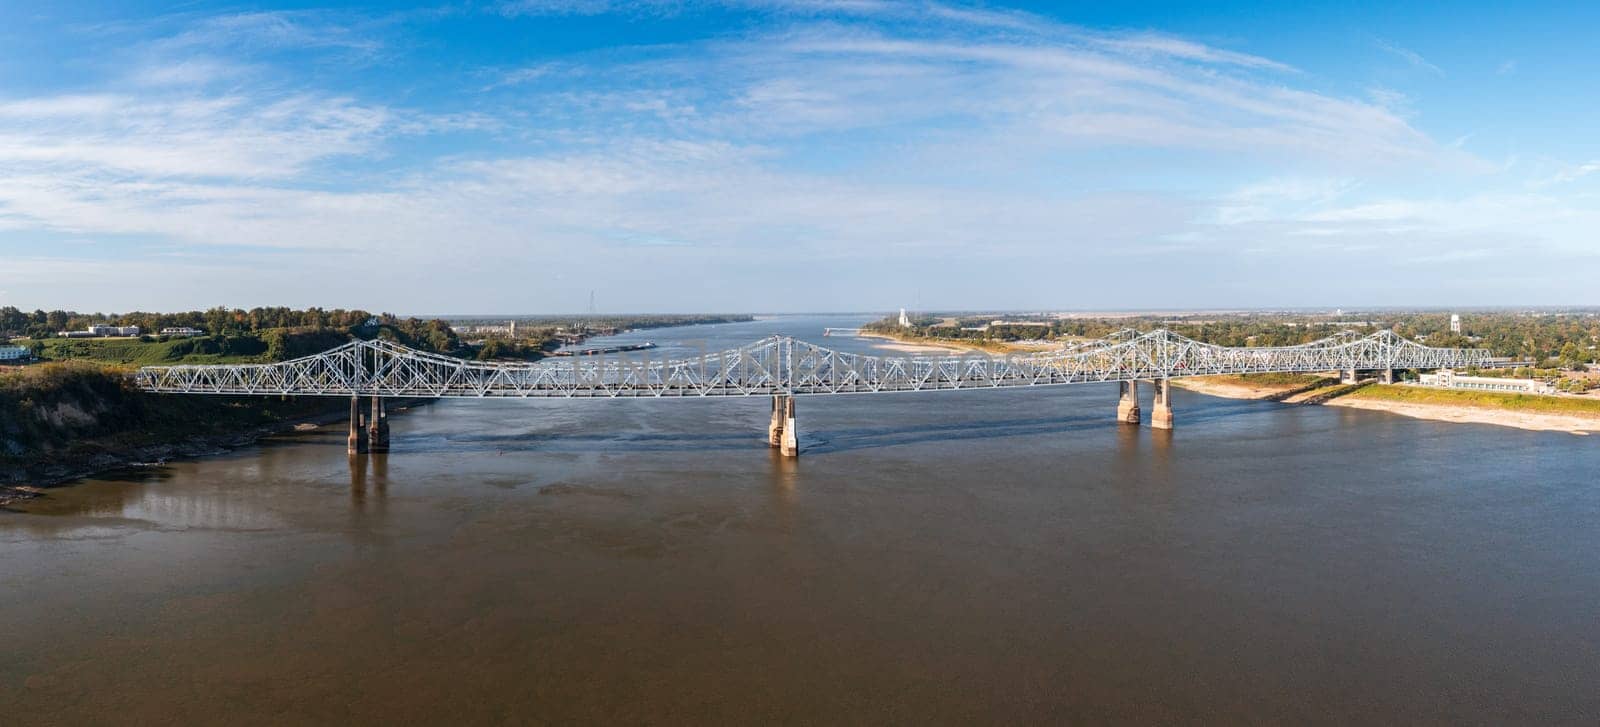 I84 interstate bridge by Natchez MS over Mississippi river in October 2023 by steheap